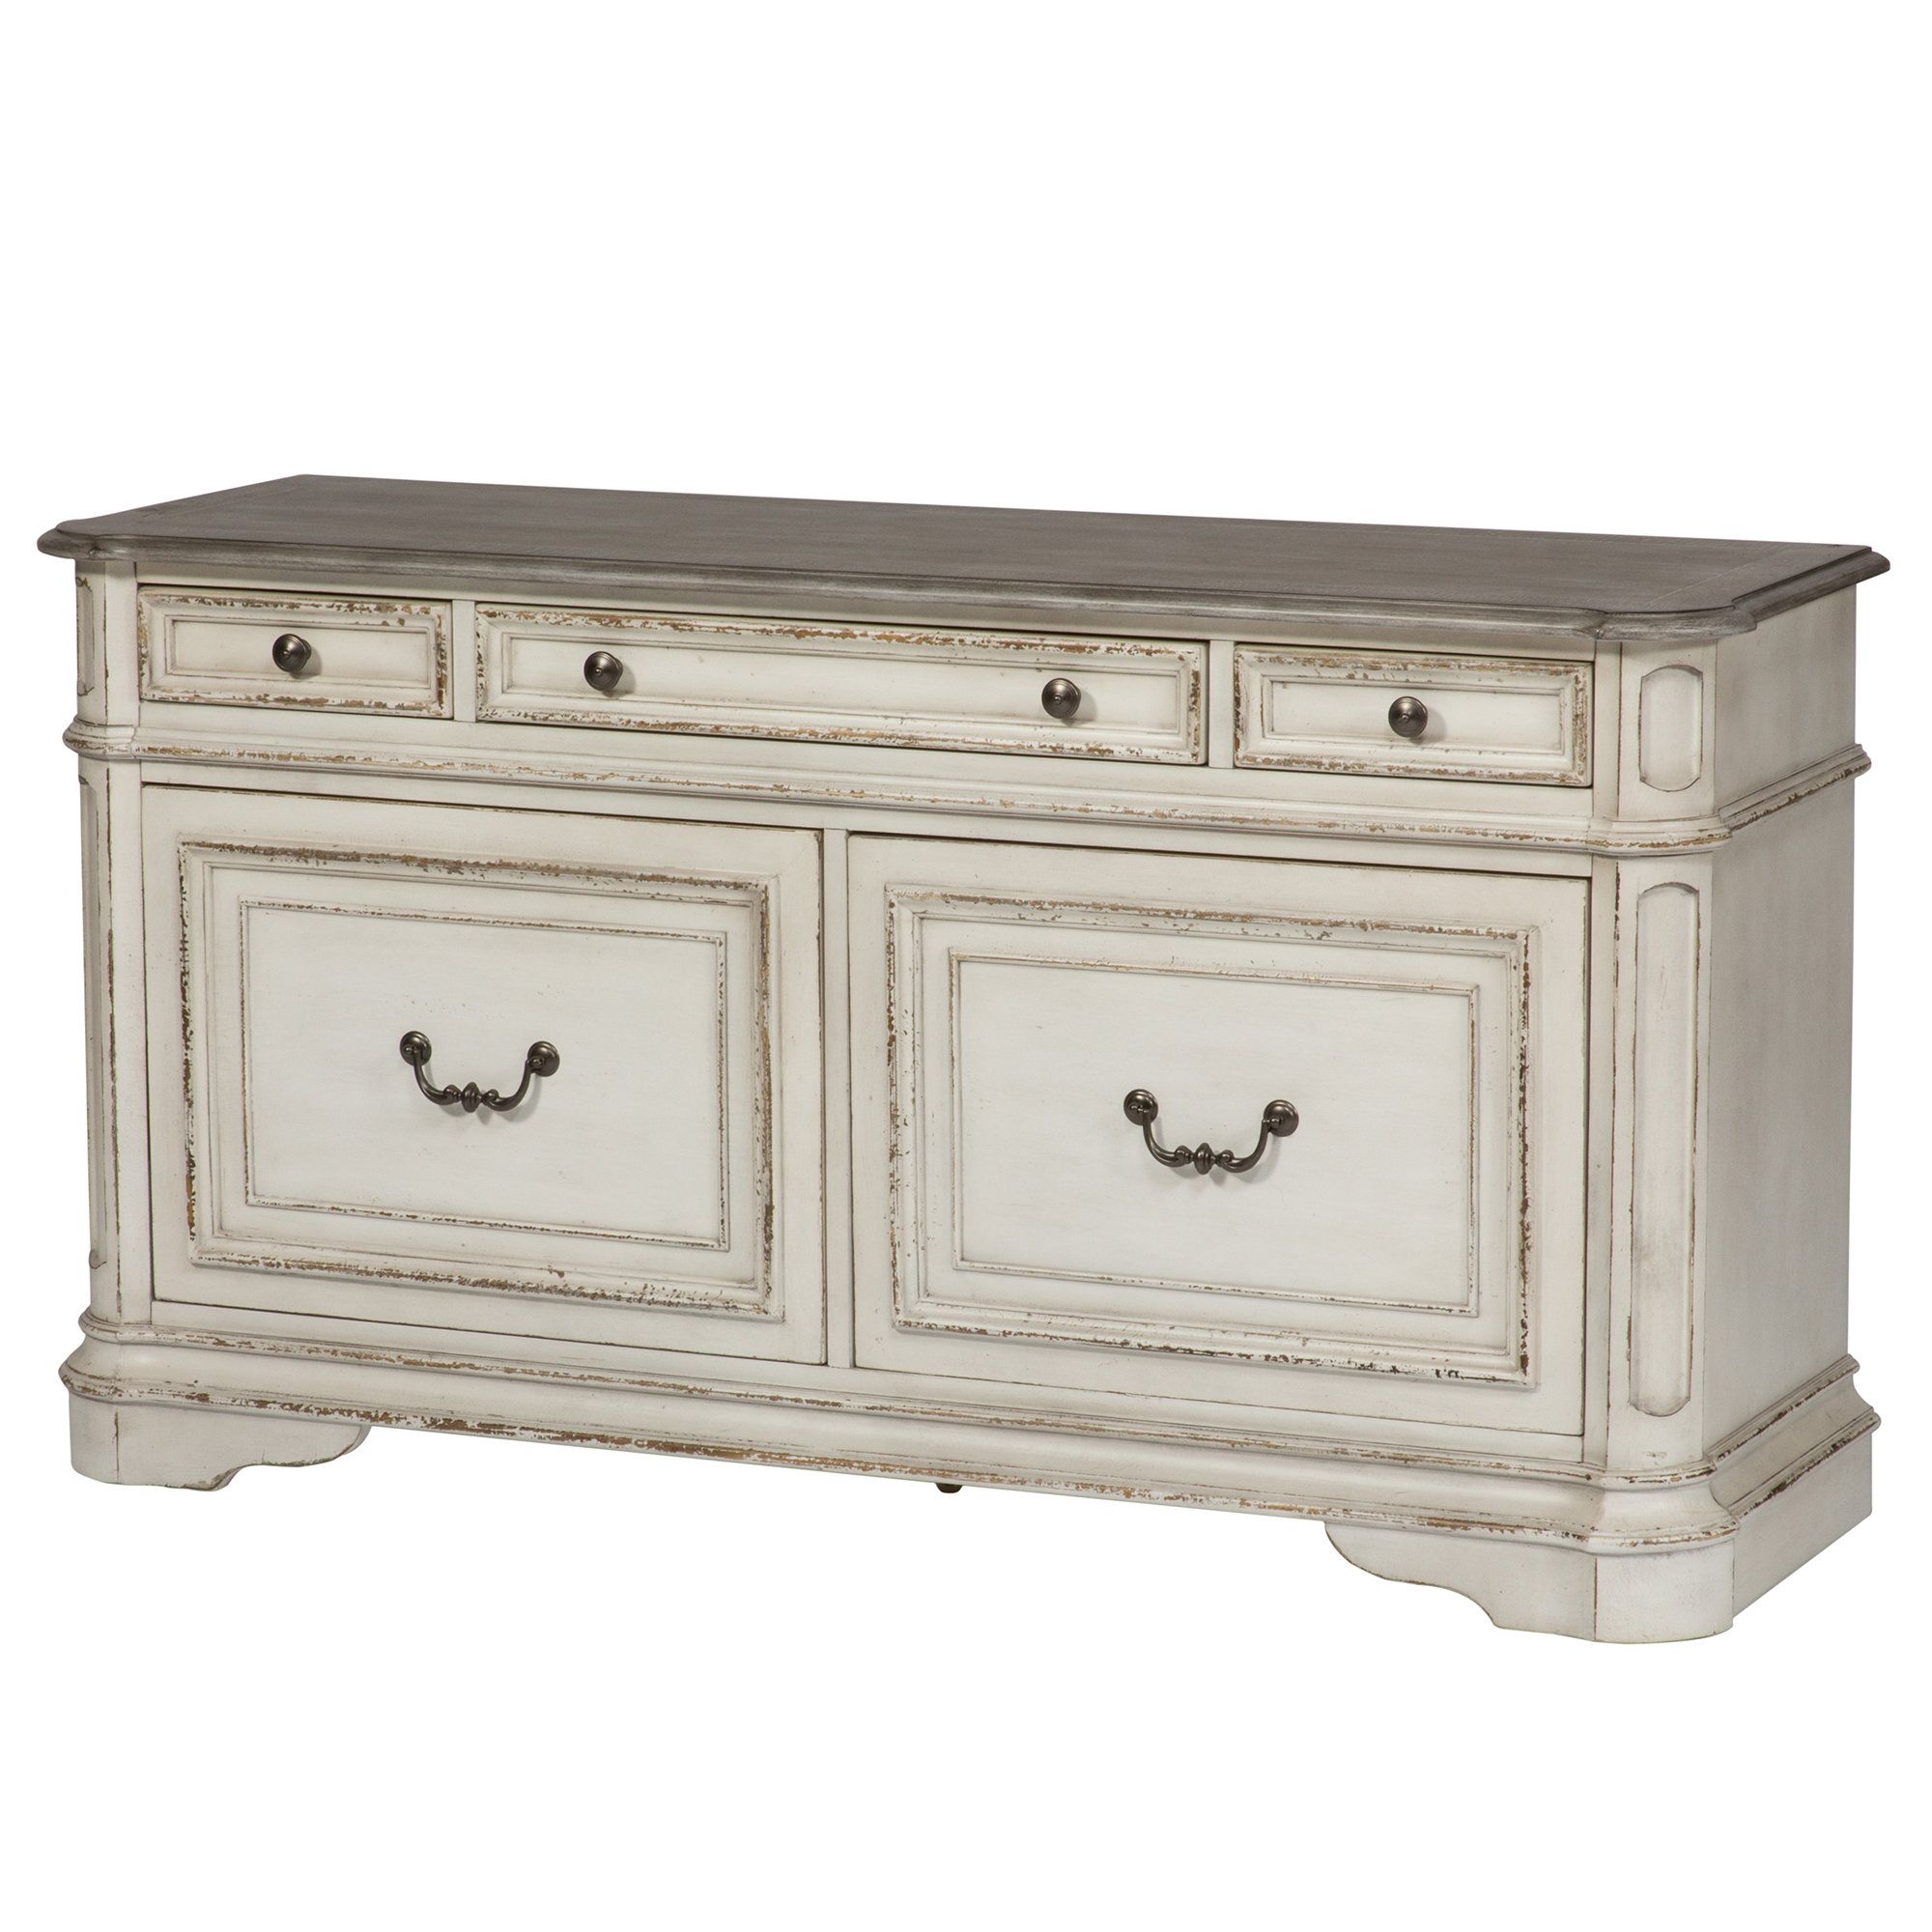 Distressed Finish Sideboards & Buffets | Joss & Main Throughout Cazenovia Charnley Sideboards (View 11 of 20)